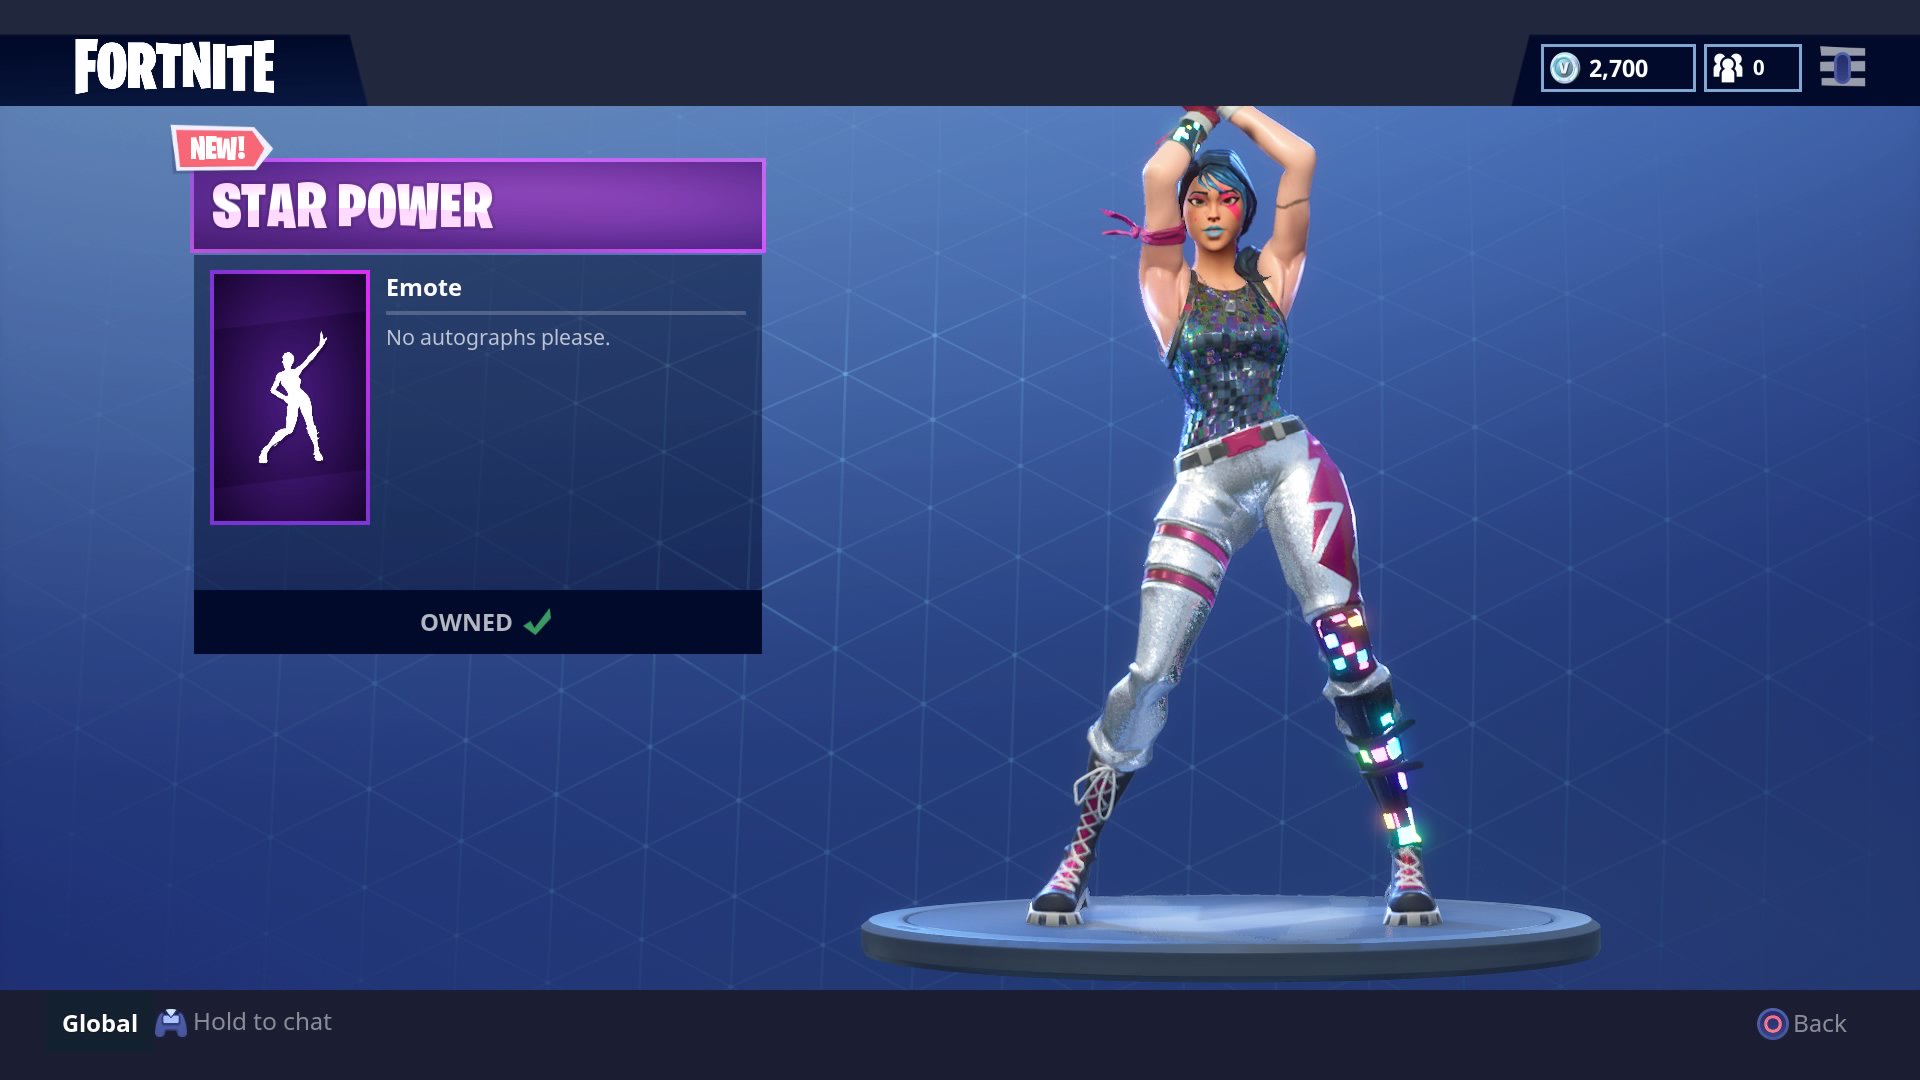 Star Power Dance Fortnite From Fortnite Star Power Dance Emote Now Available In The Store